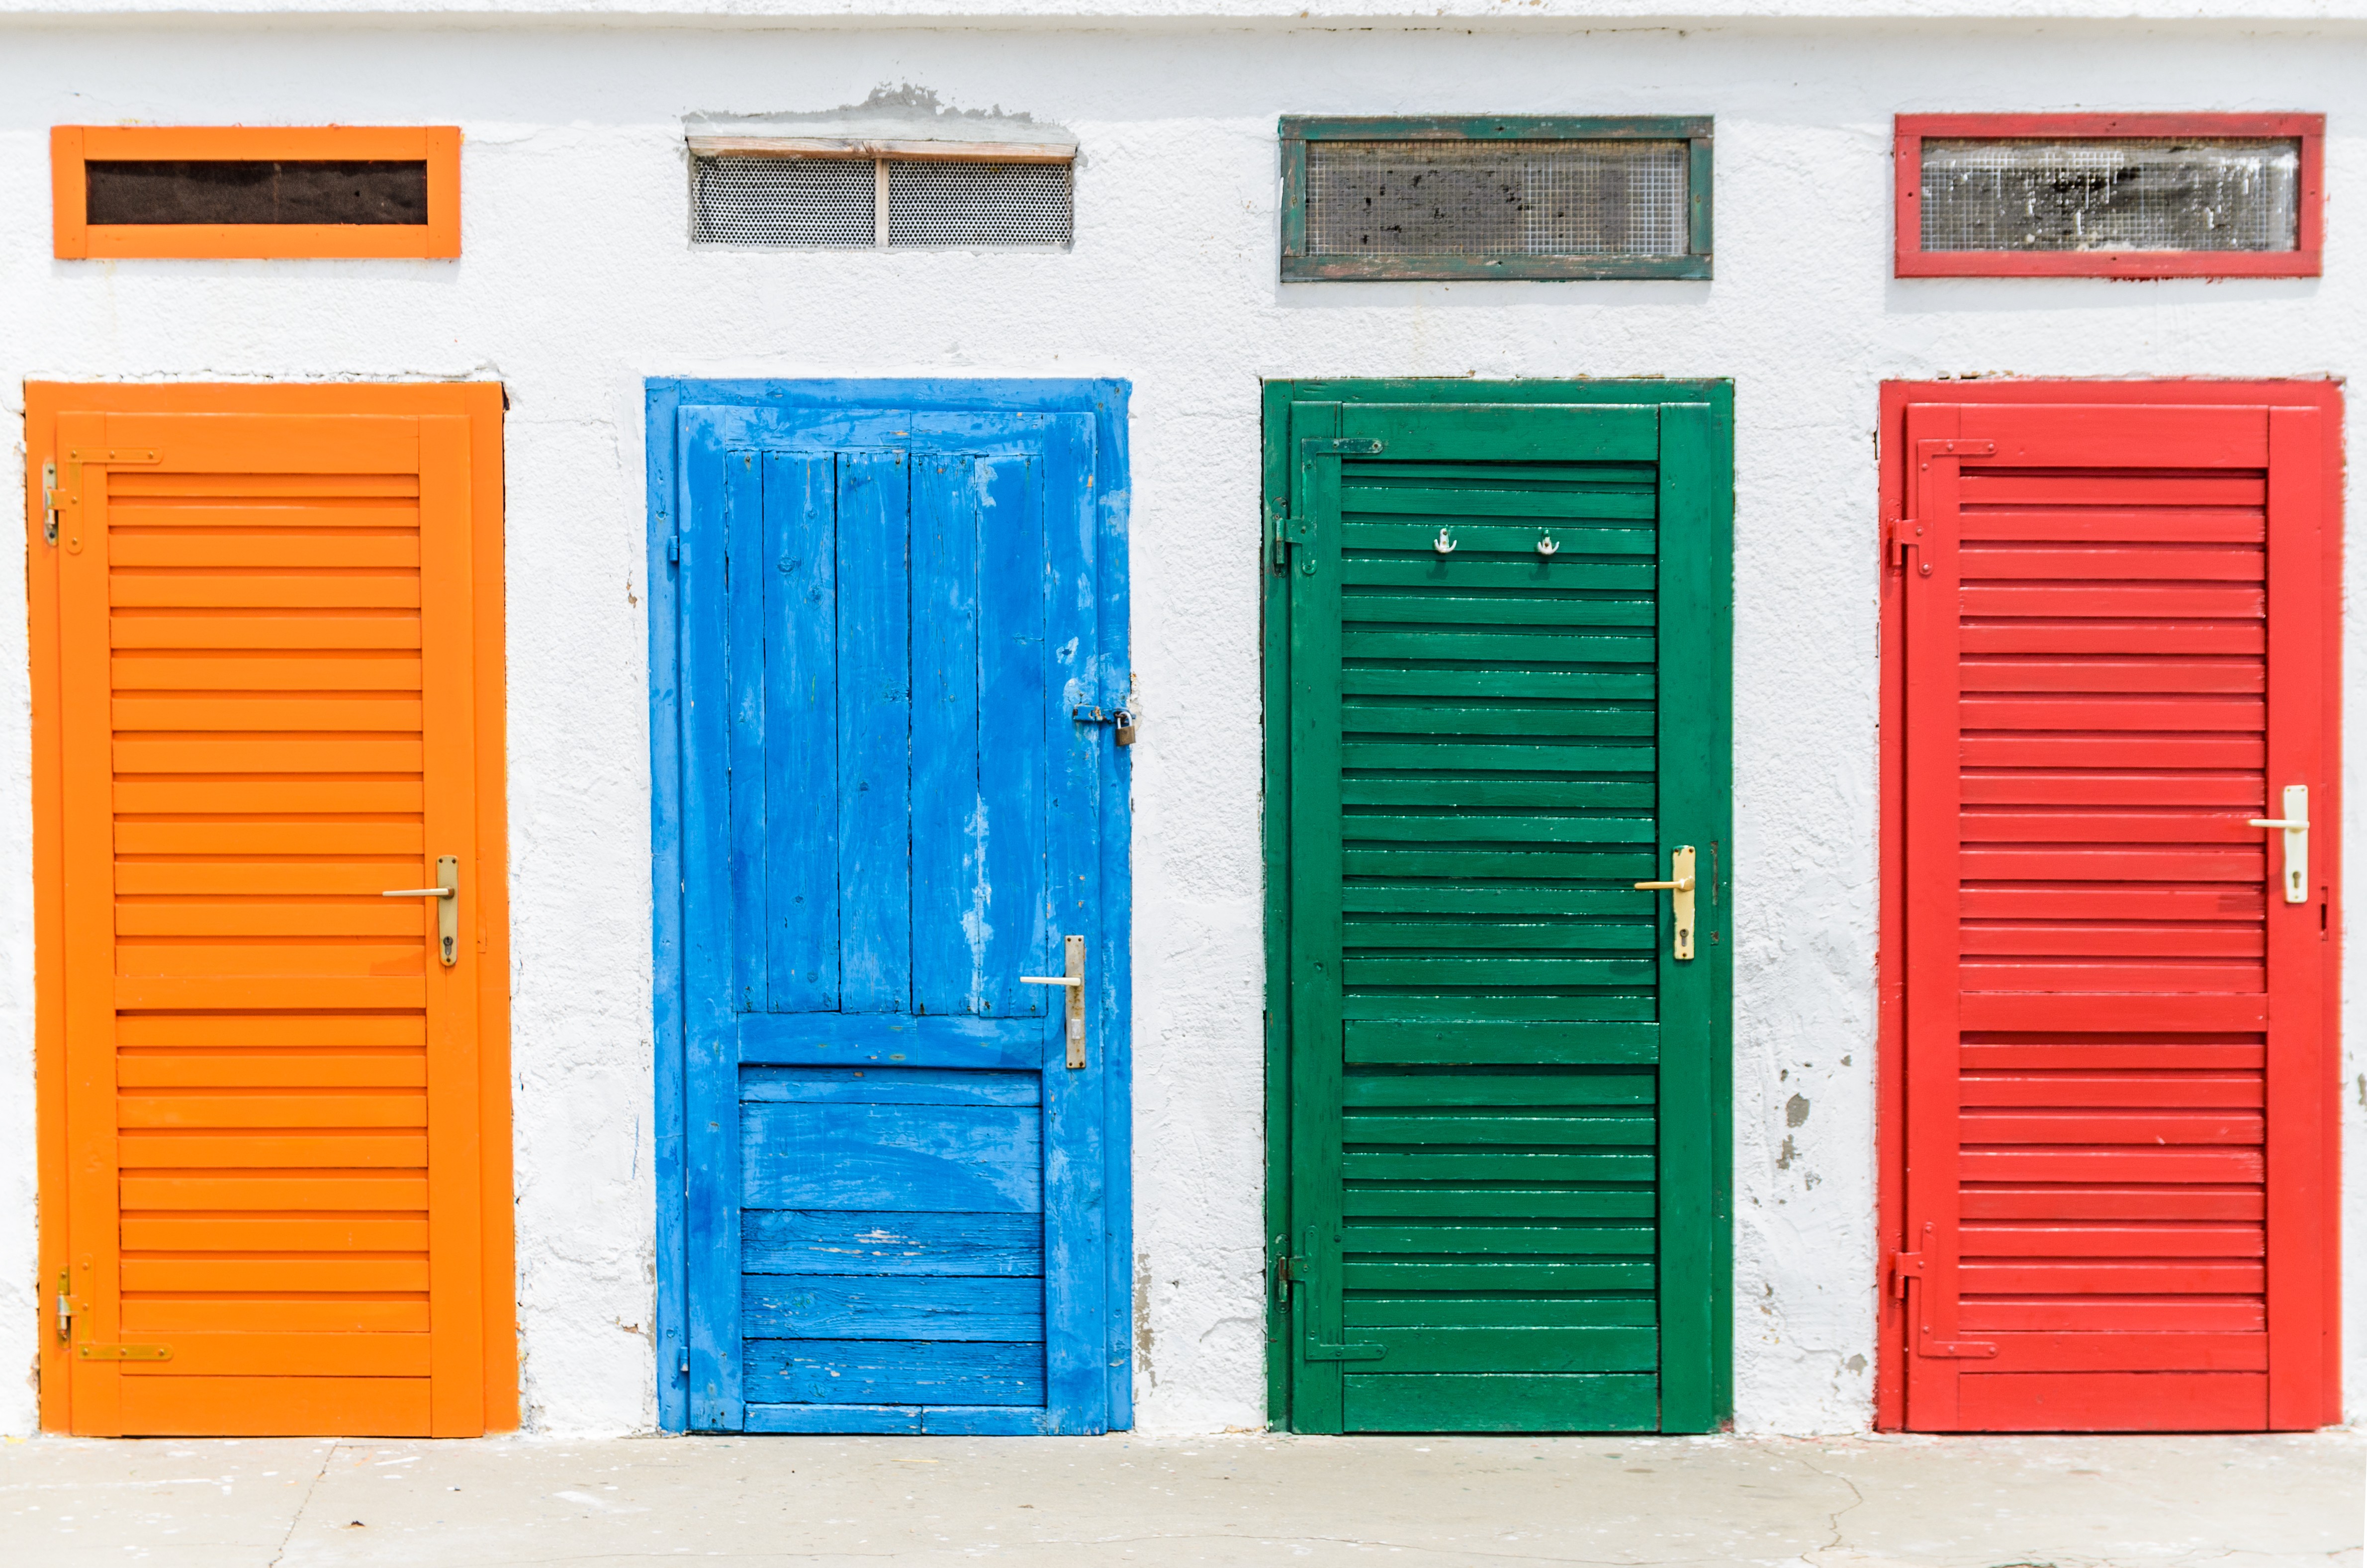 Four colorful wooden doors in a row. From left to right: orange, blue, green, red.